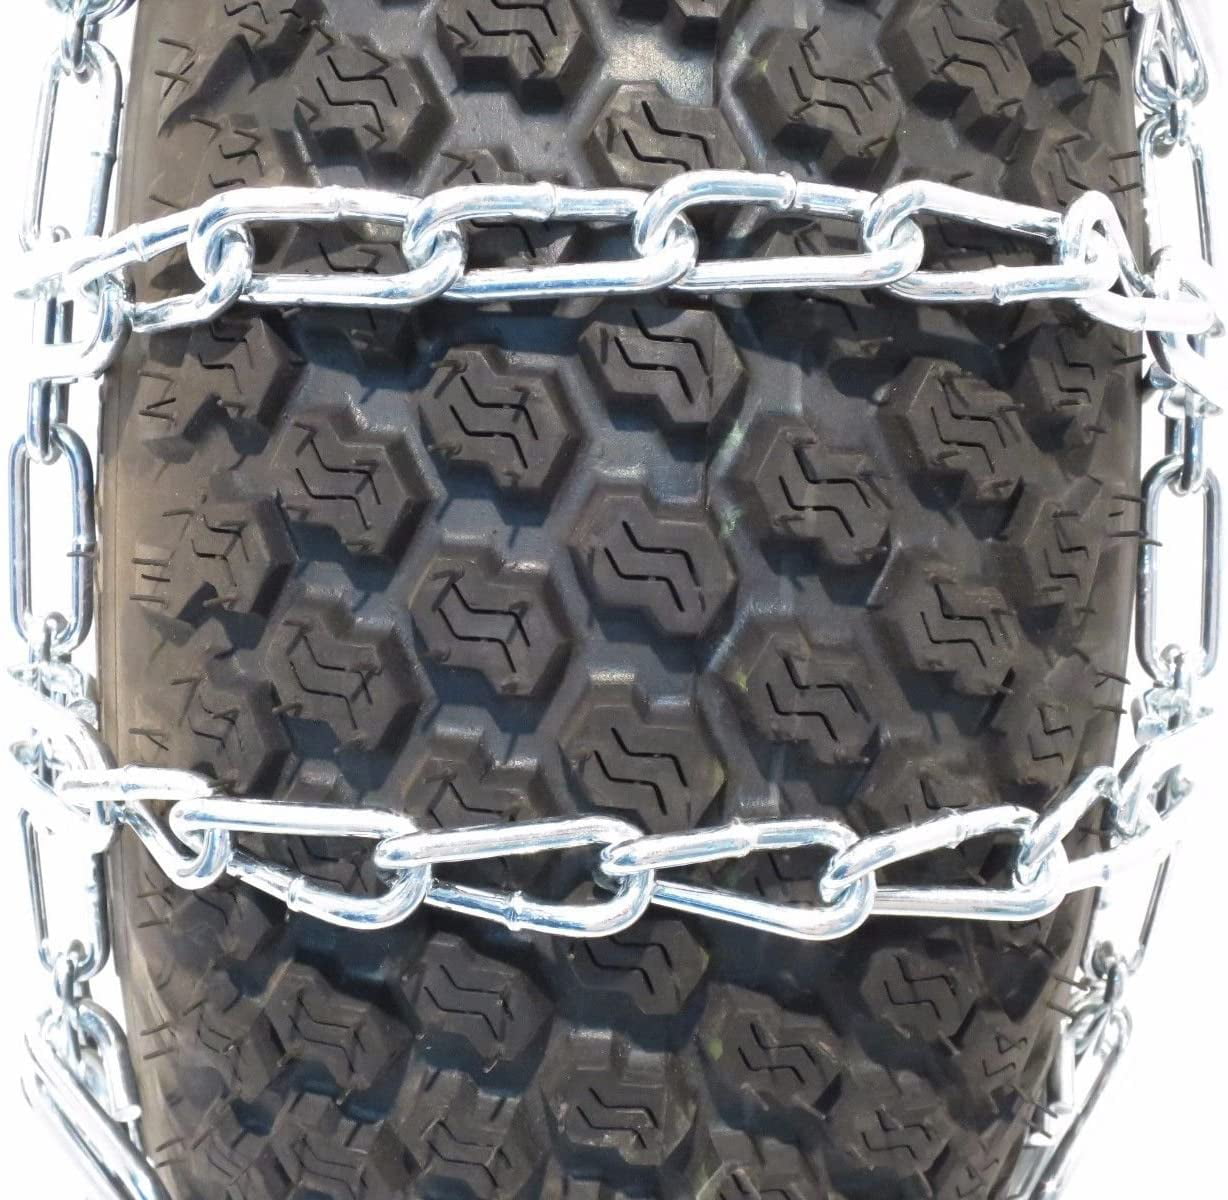 The ROP Shop New Pair 2 Link TIRE Chains 18x8.5x8 for Garden Tractors/Riders/Snowblower 